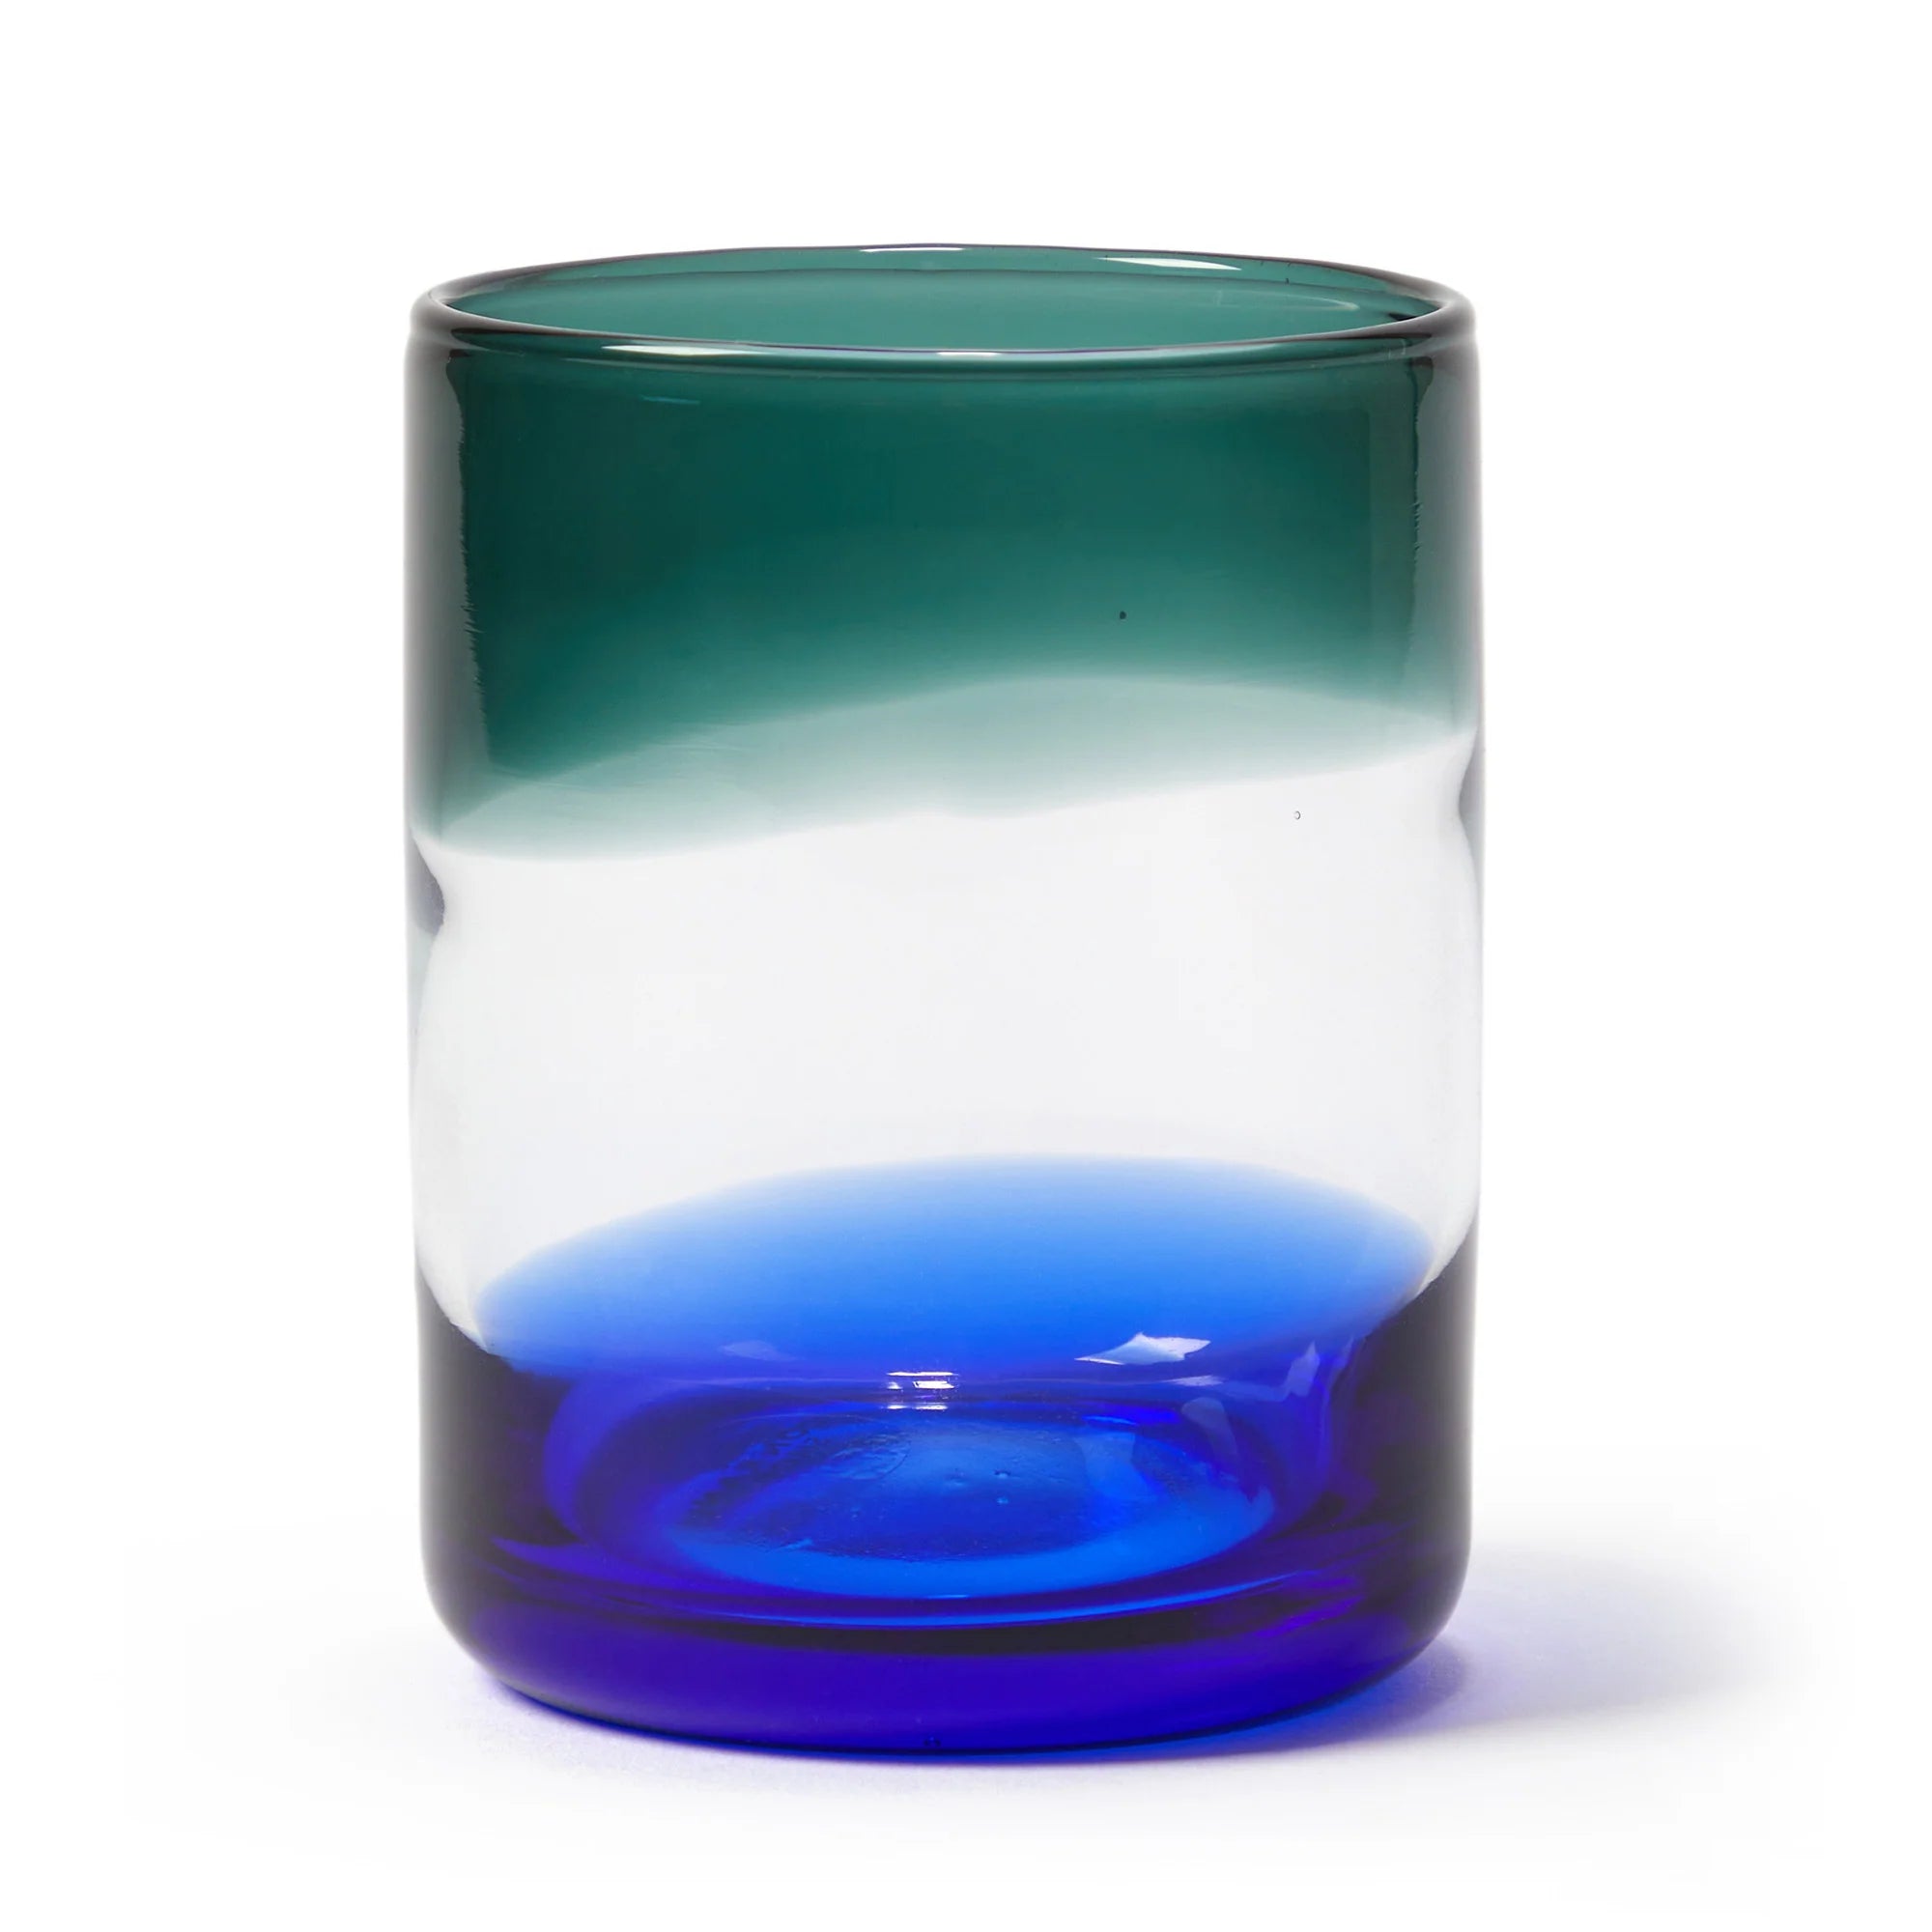 Ombre Tumbler in cobalt and green by The Conran Shop